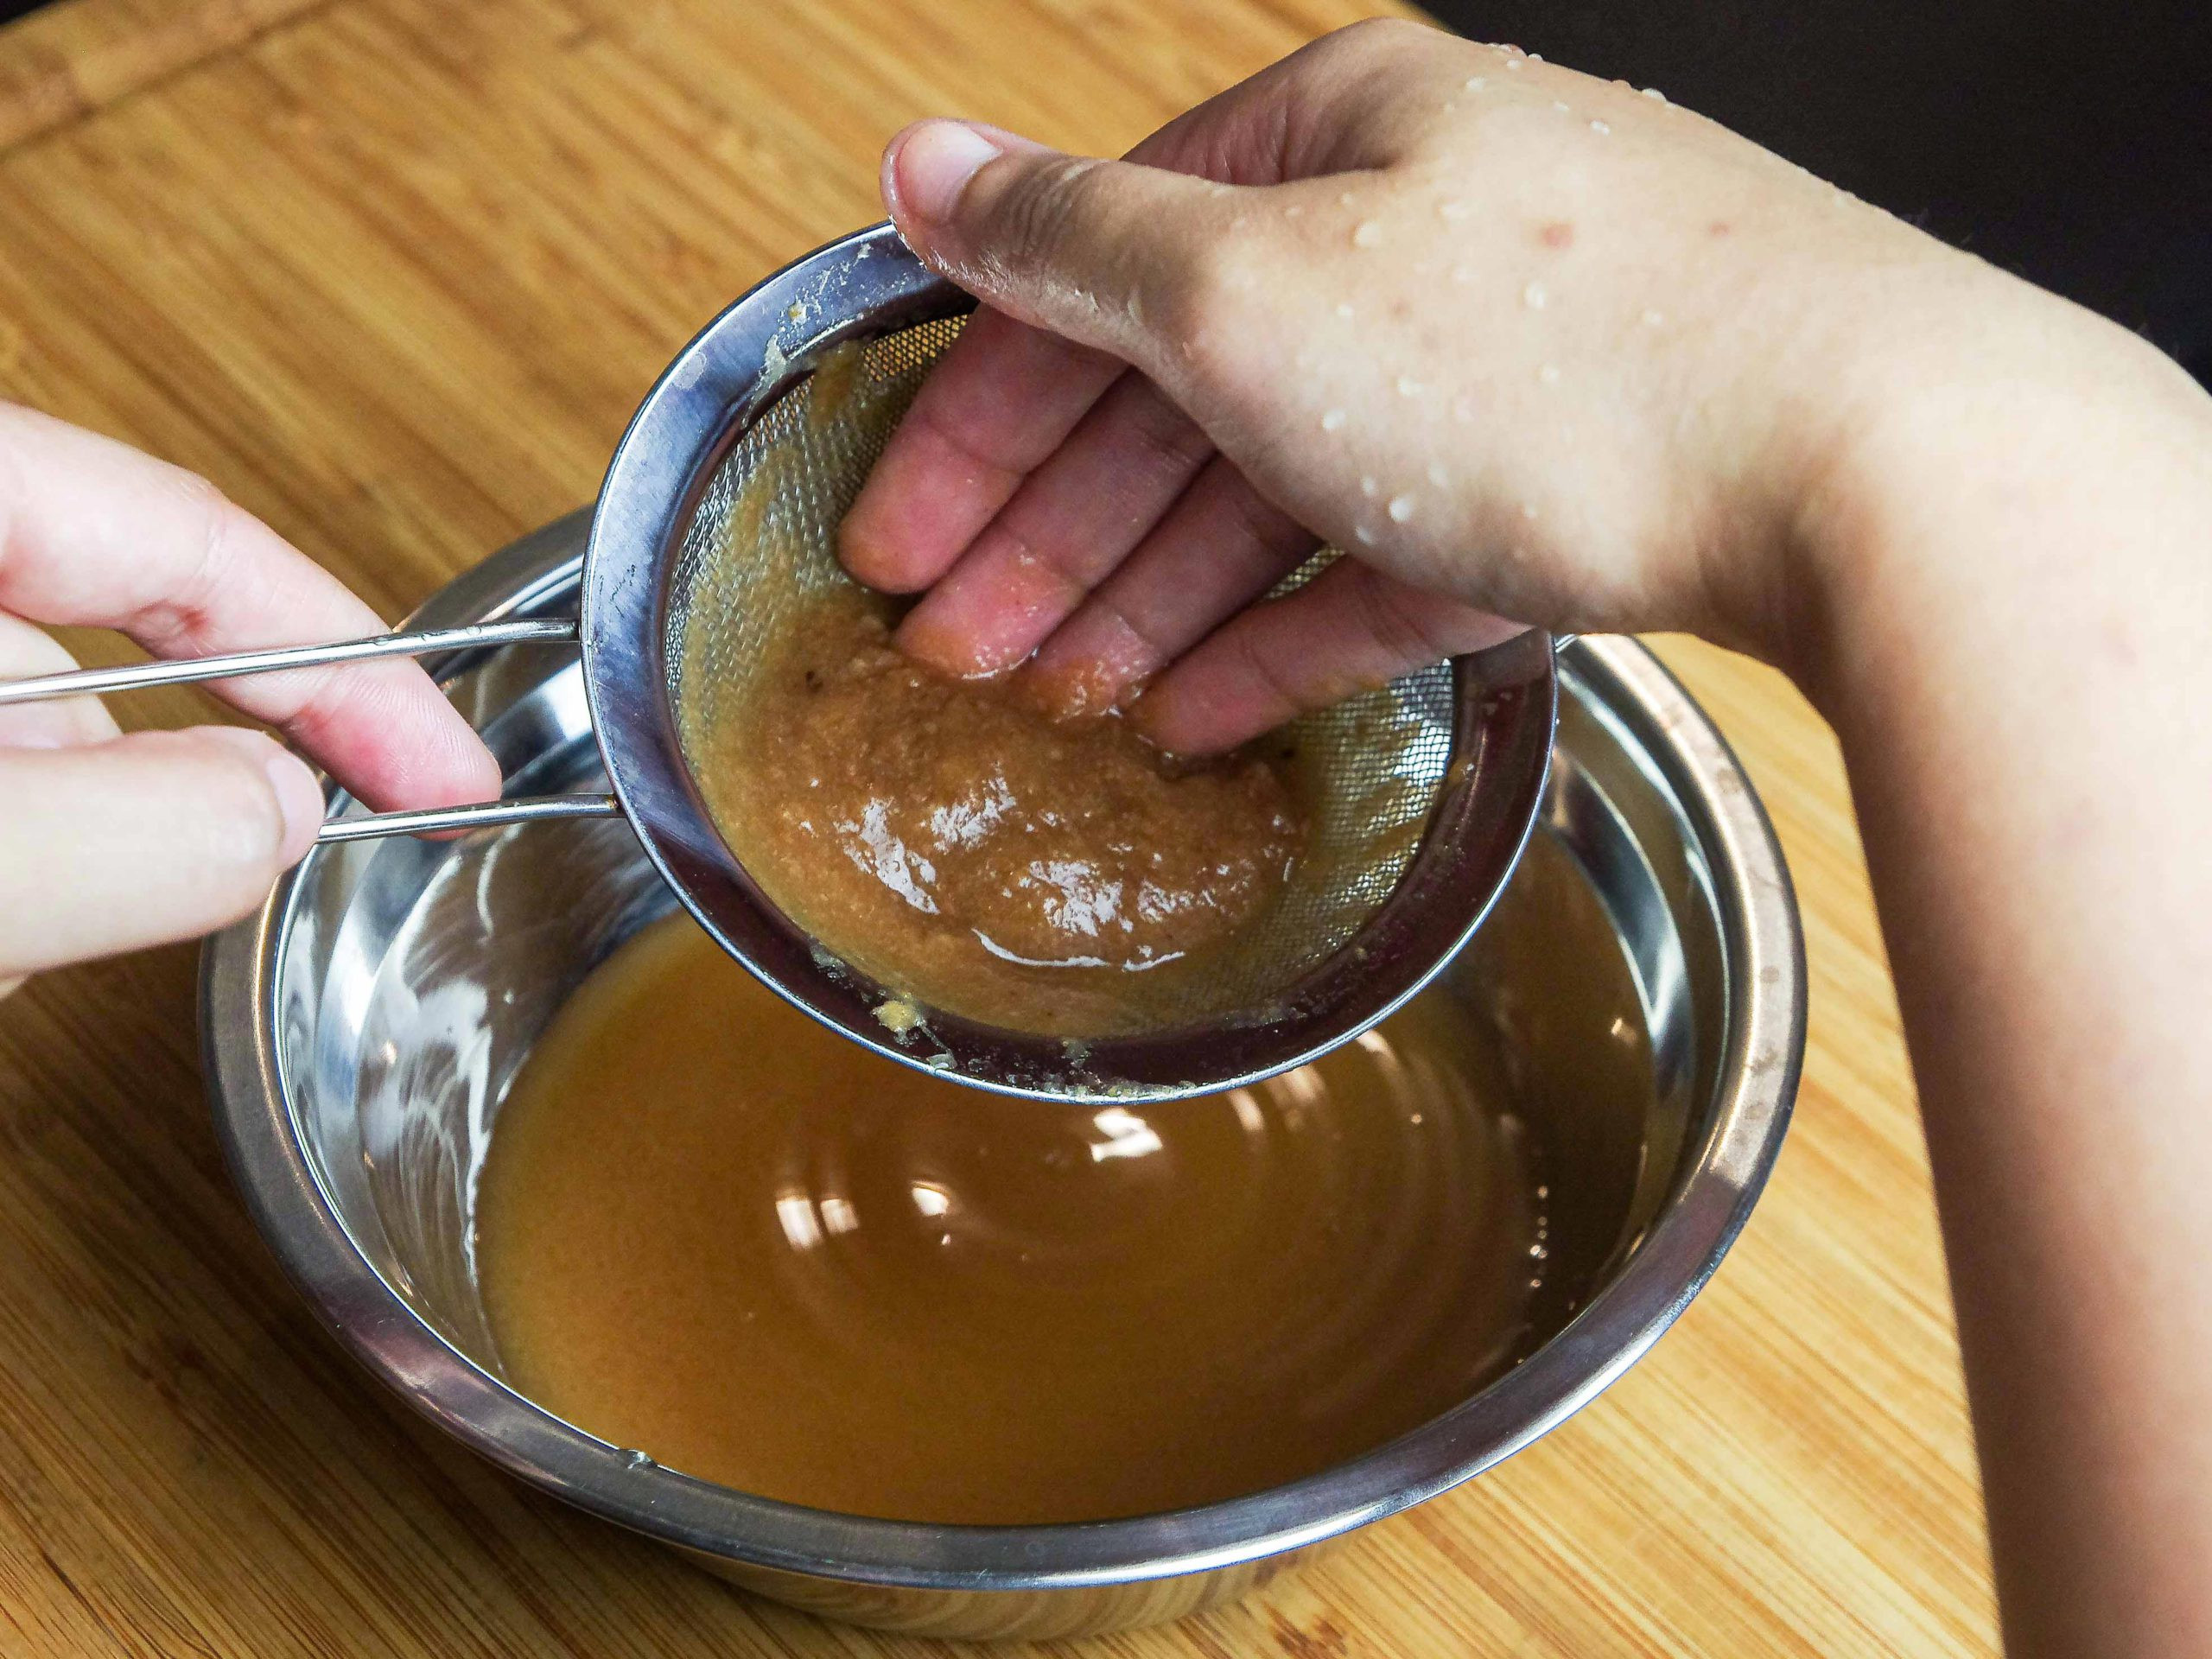 Fingers squeezing pulp on the side of the strainer.